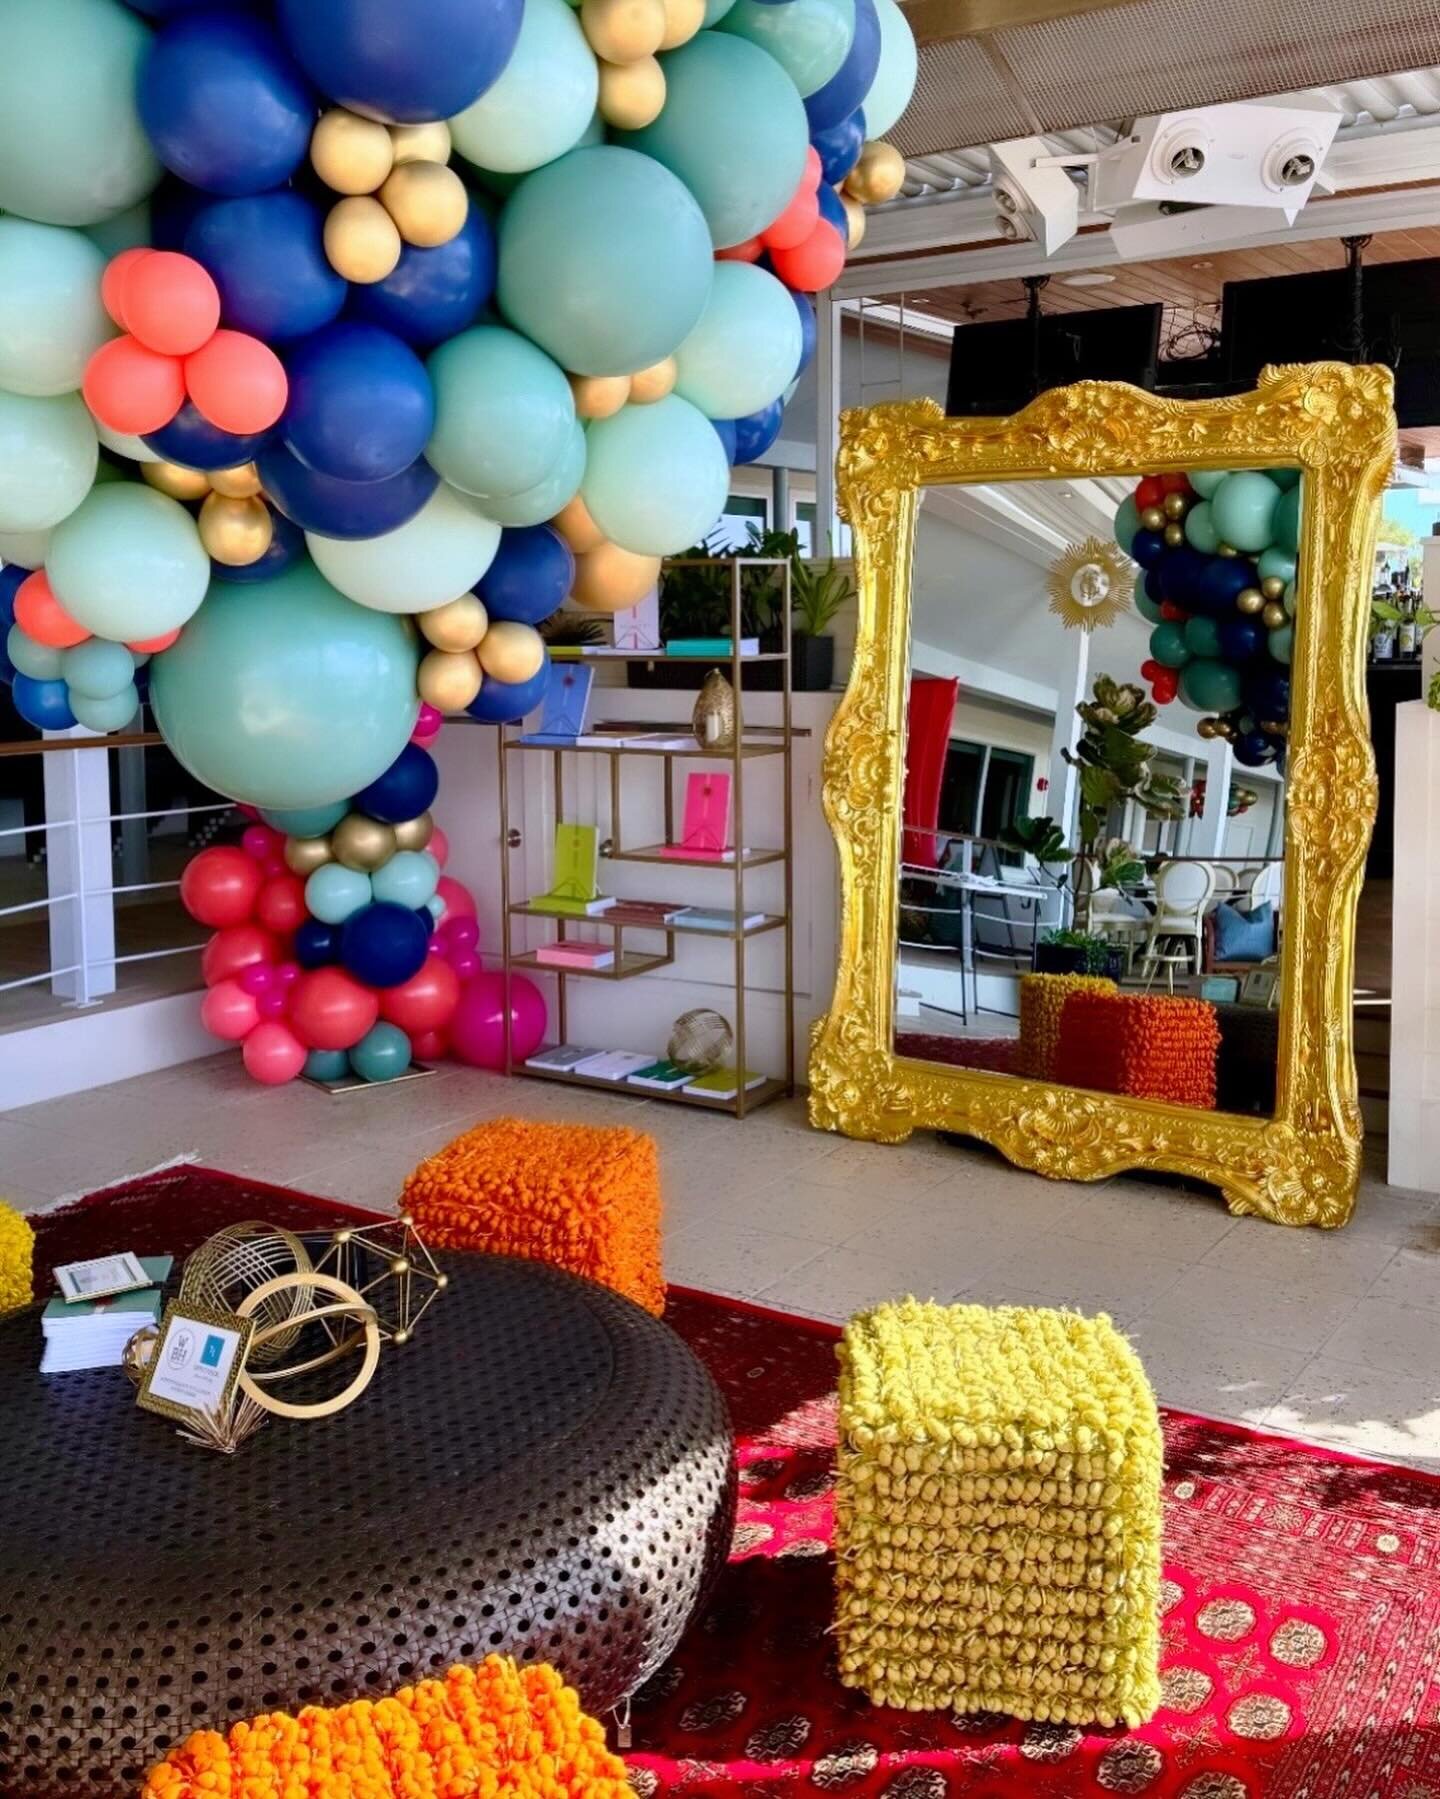 When a fabulous collaboration comes together, magic happens✨ Balloon Chandeliers are our new favorite! 

@tsgsarasota | Volume 9 Launch Party
@sostaged |  Furniture Rentals
@beachsuitesami | Venue
@thewhitebouncehousetampa &amp; @tippy.taylor | Ballo